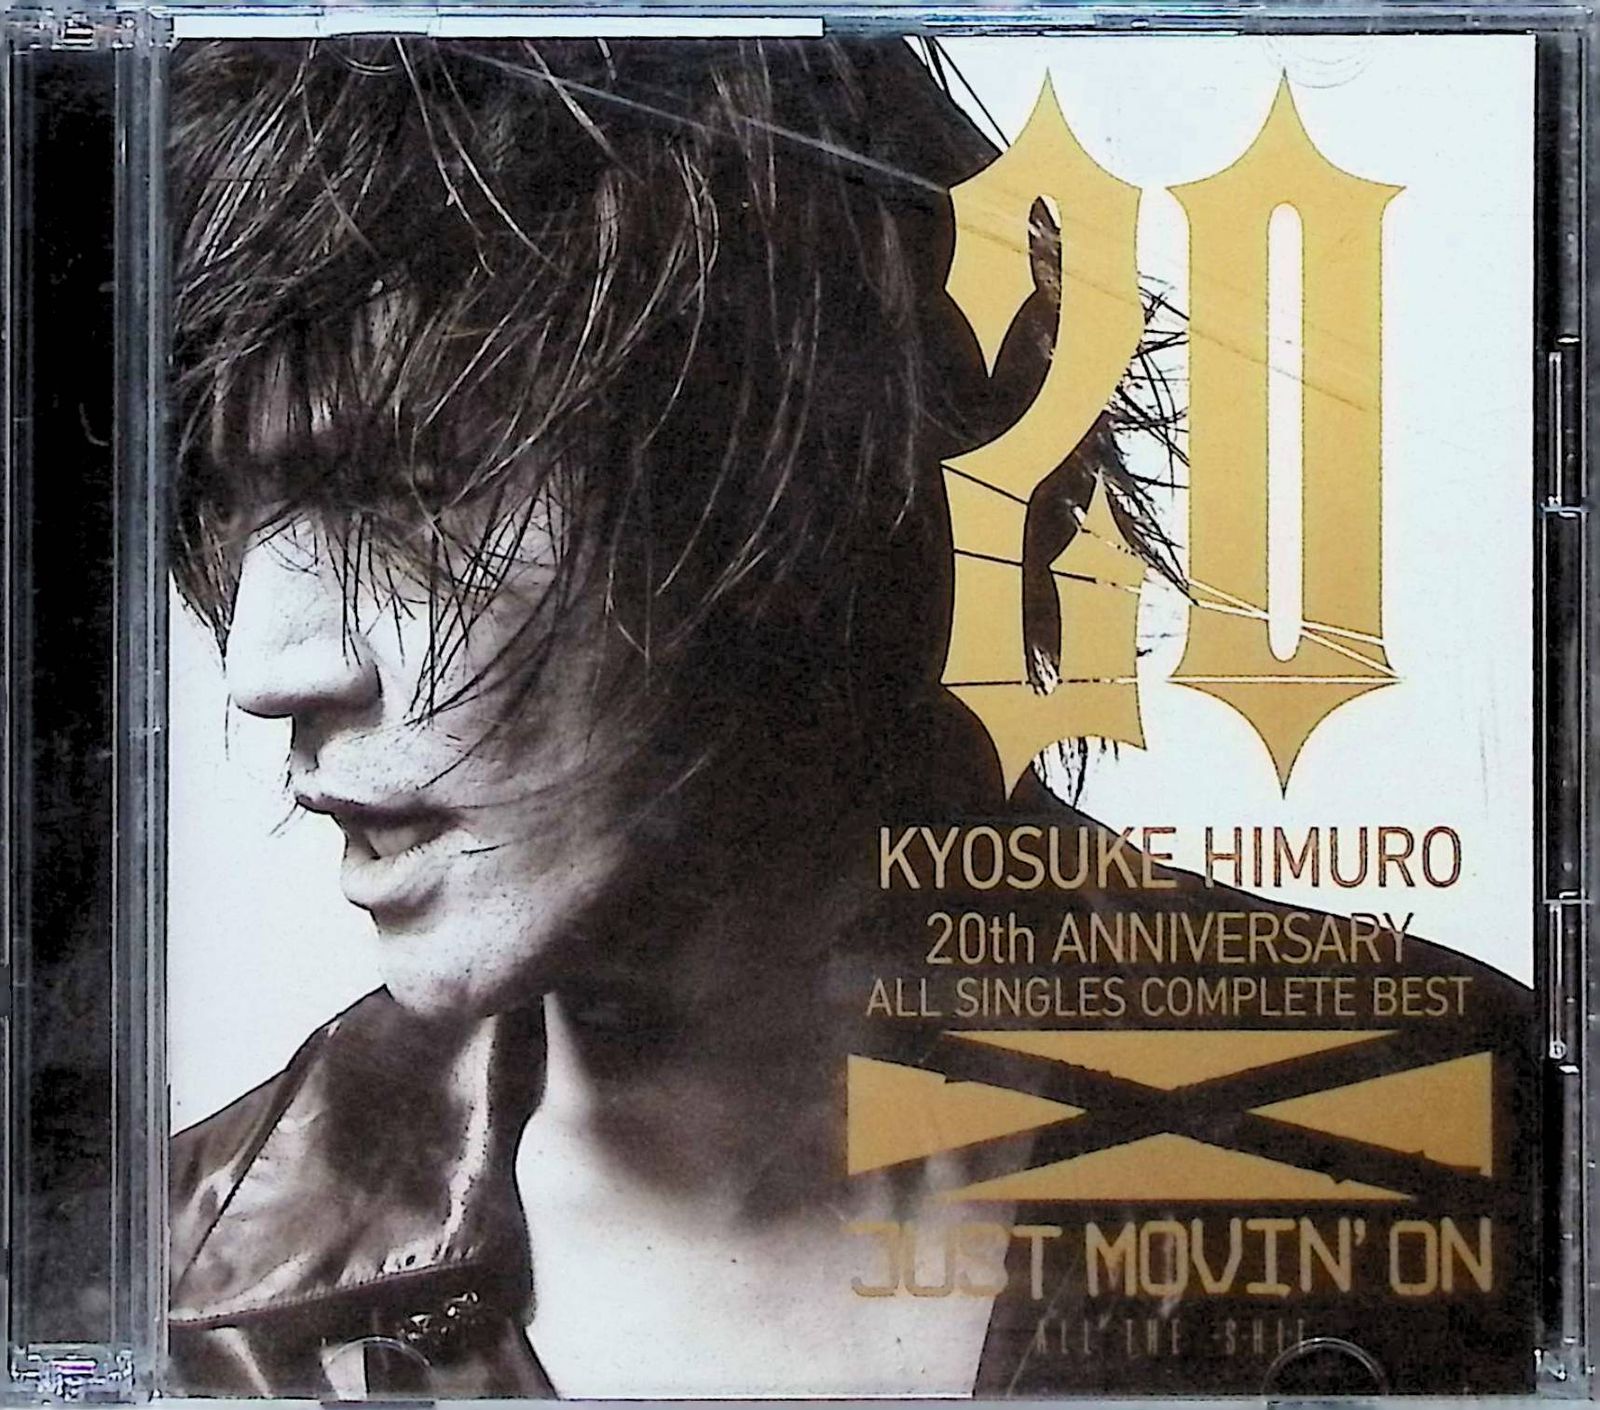 20th Anniversary ALL SINGLES COMPLETE BEST JUST MOVIN'ON~ALL THE-S-HIT~  (2枚組) / 氷室京介 (CD) - メルカリ